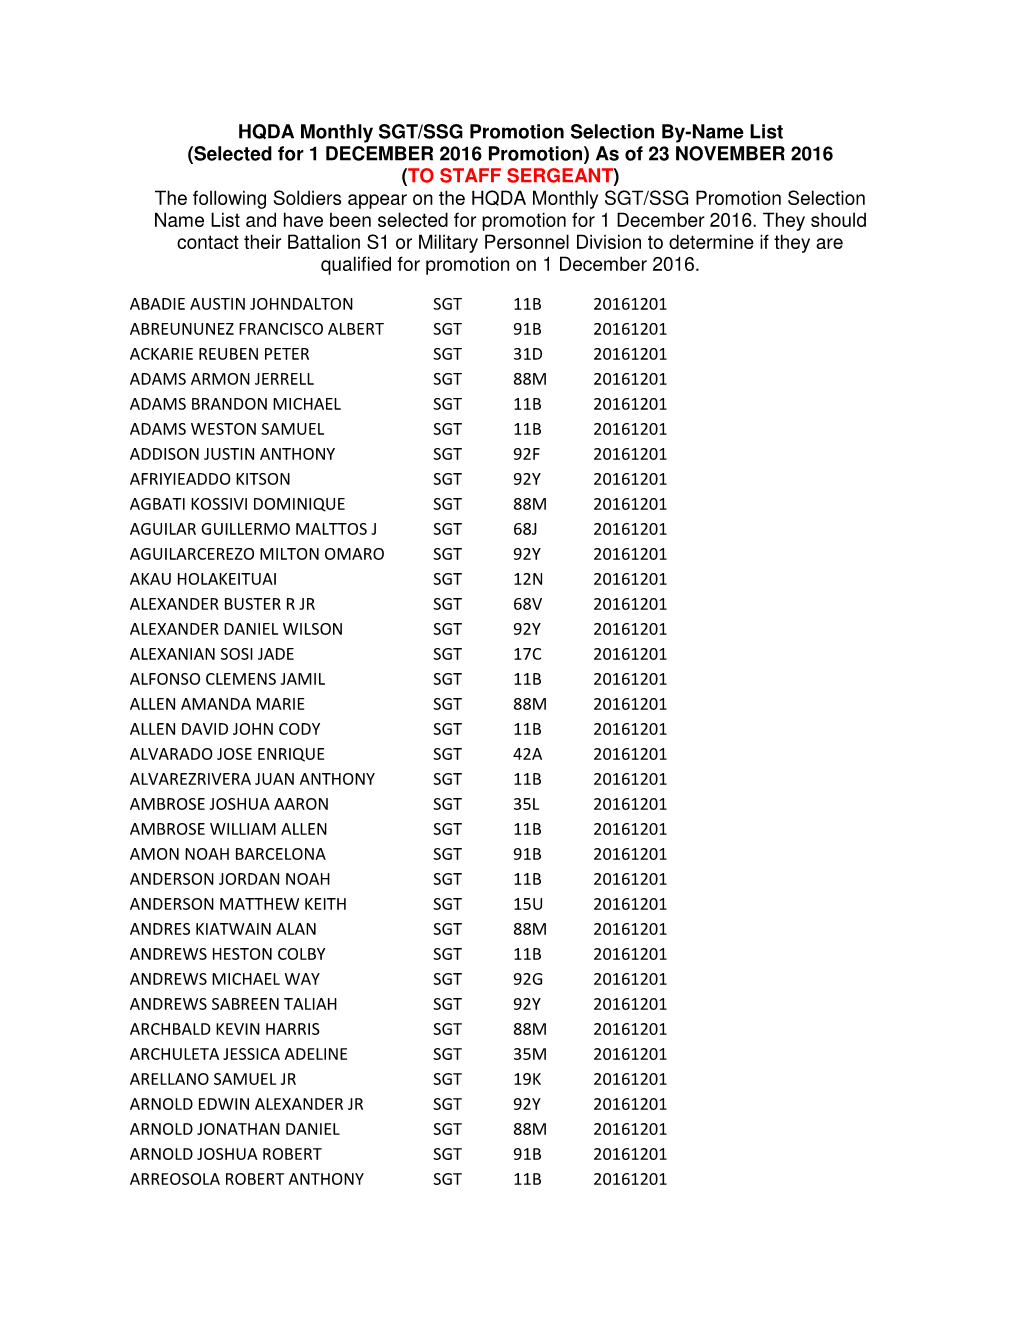 HQDA Monthly SGT/SSG Promotion Selection By-Name List